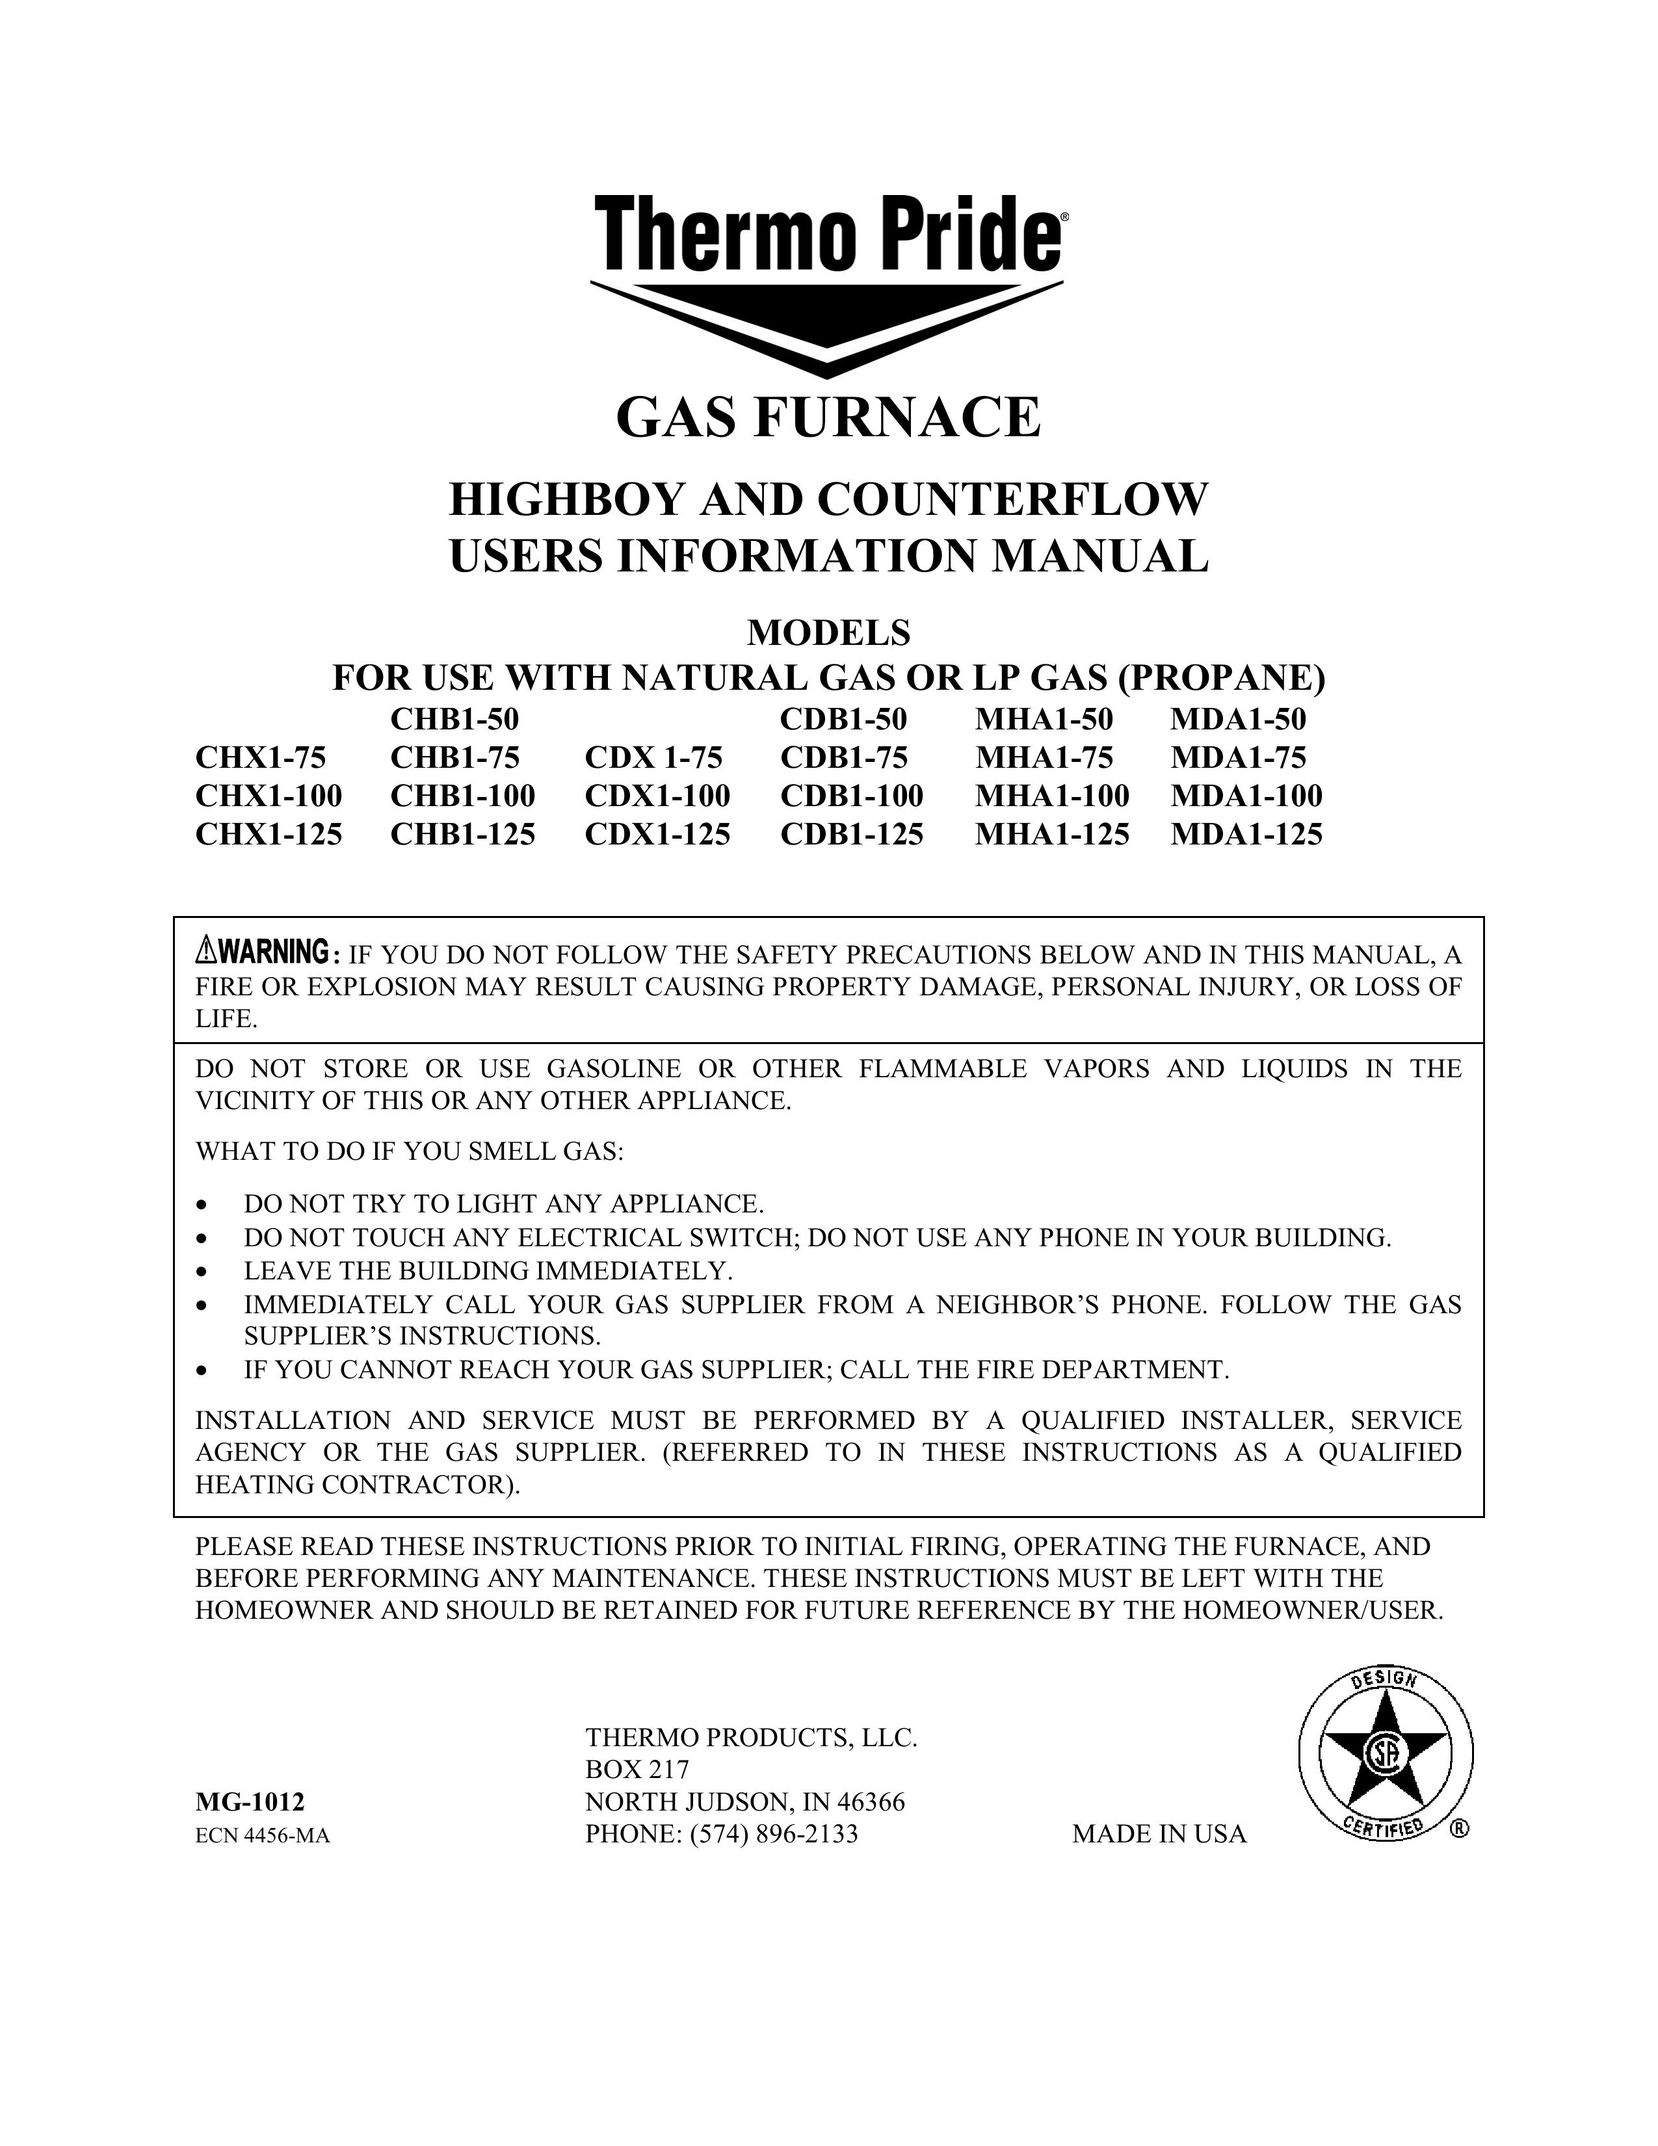 Thermo Products CDB1-50 Furnace User Manual